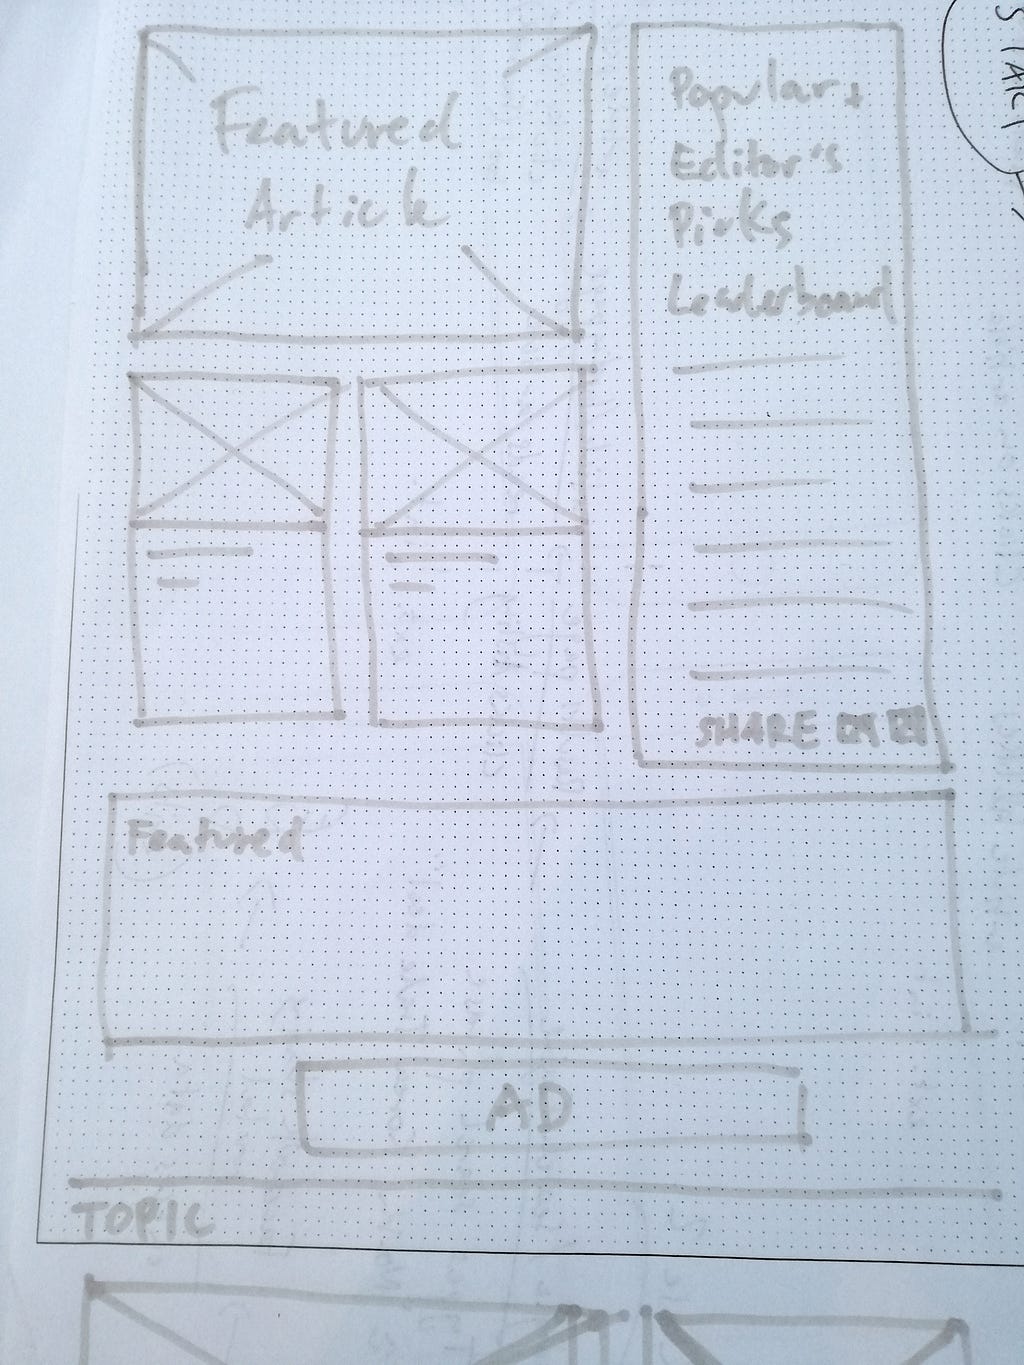 Wireframe showing structure of Forbes’ homepage